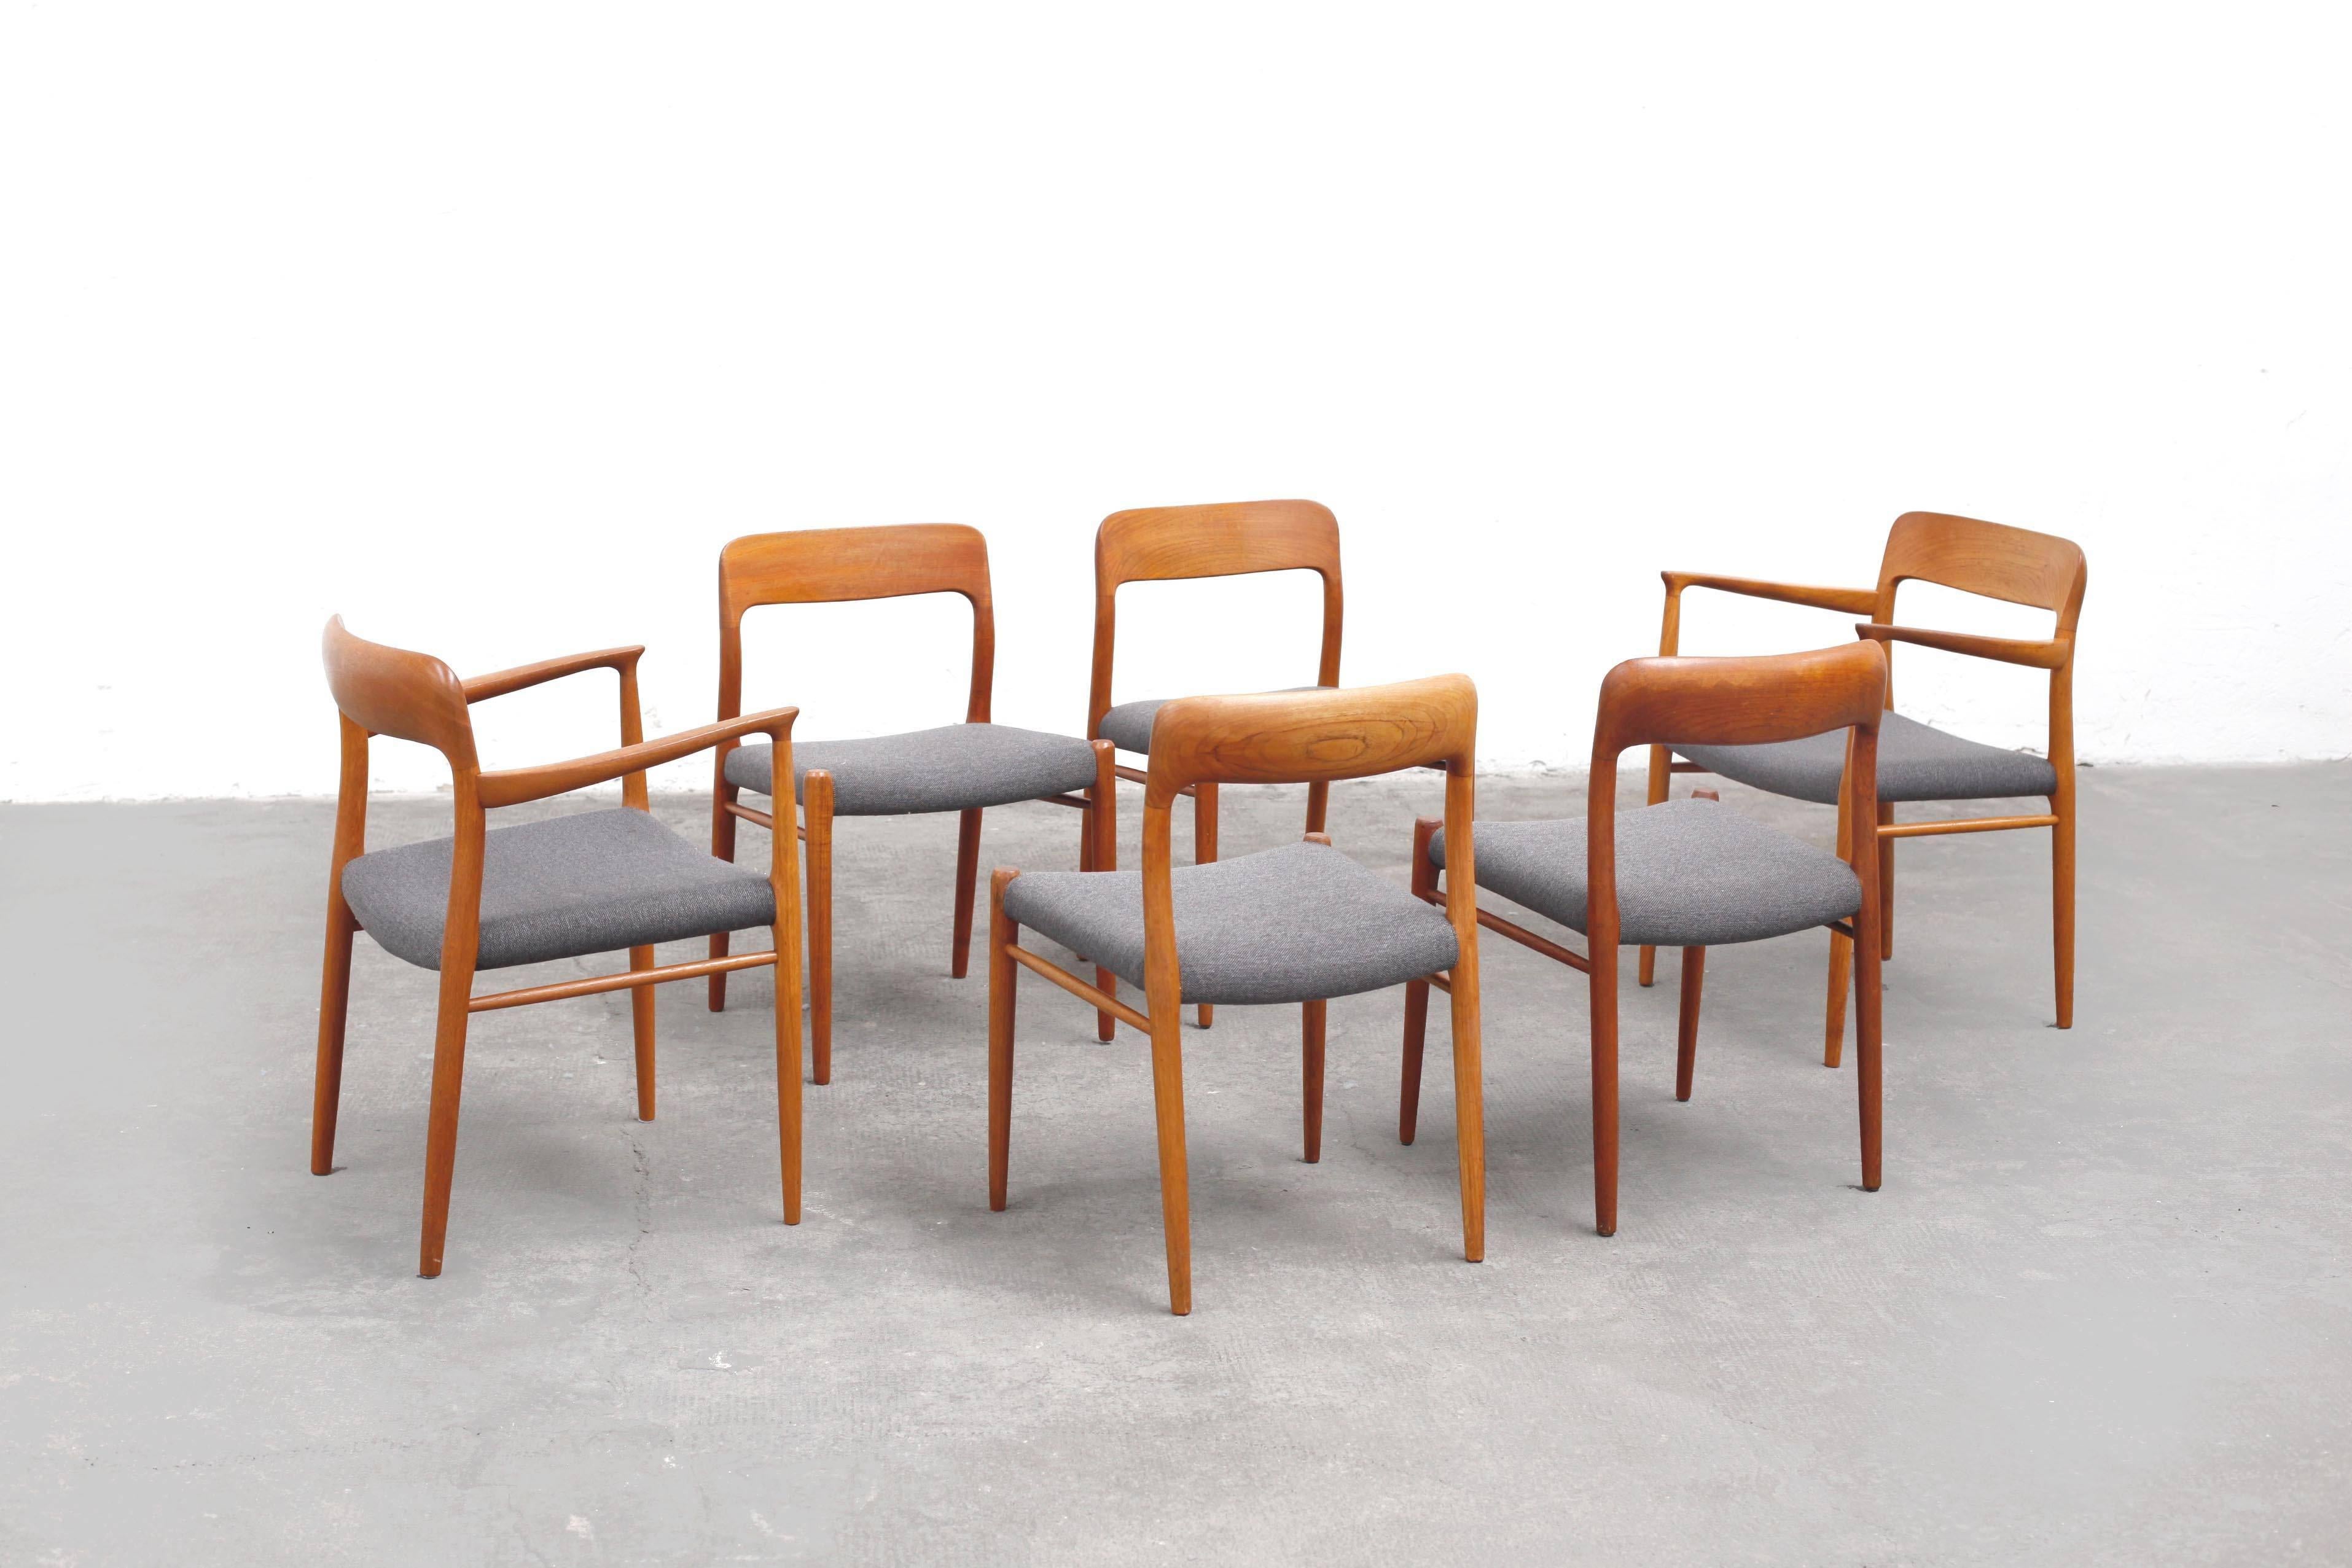 A beautiful dining group with two rare armchairs by Niels Otto Møller.
This particular model was first manufactured in 1959.
Although very simple in its form, the sculptural backrest adds an organic aspect to the design and is what sets it apart